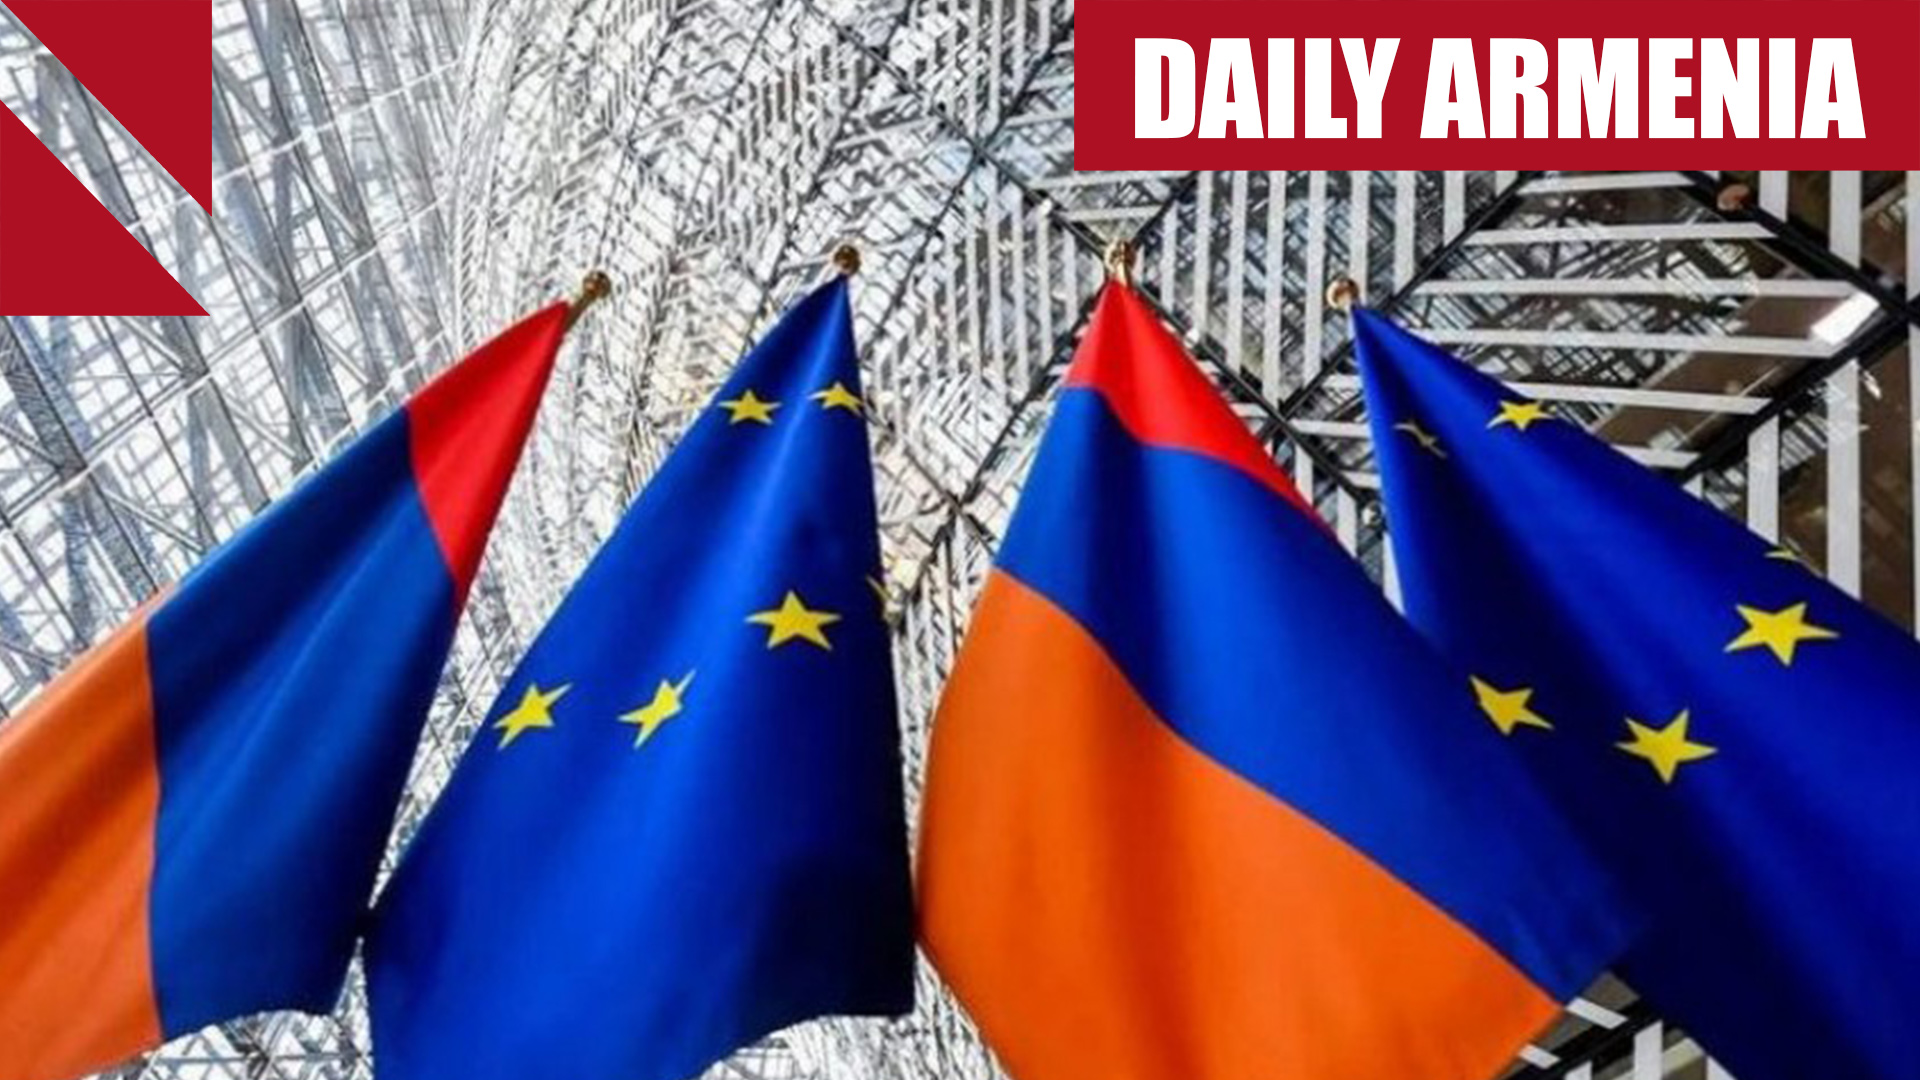 Armenia may hold referendum on joining EU ‘in near future’